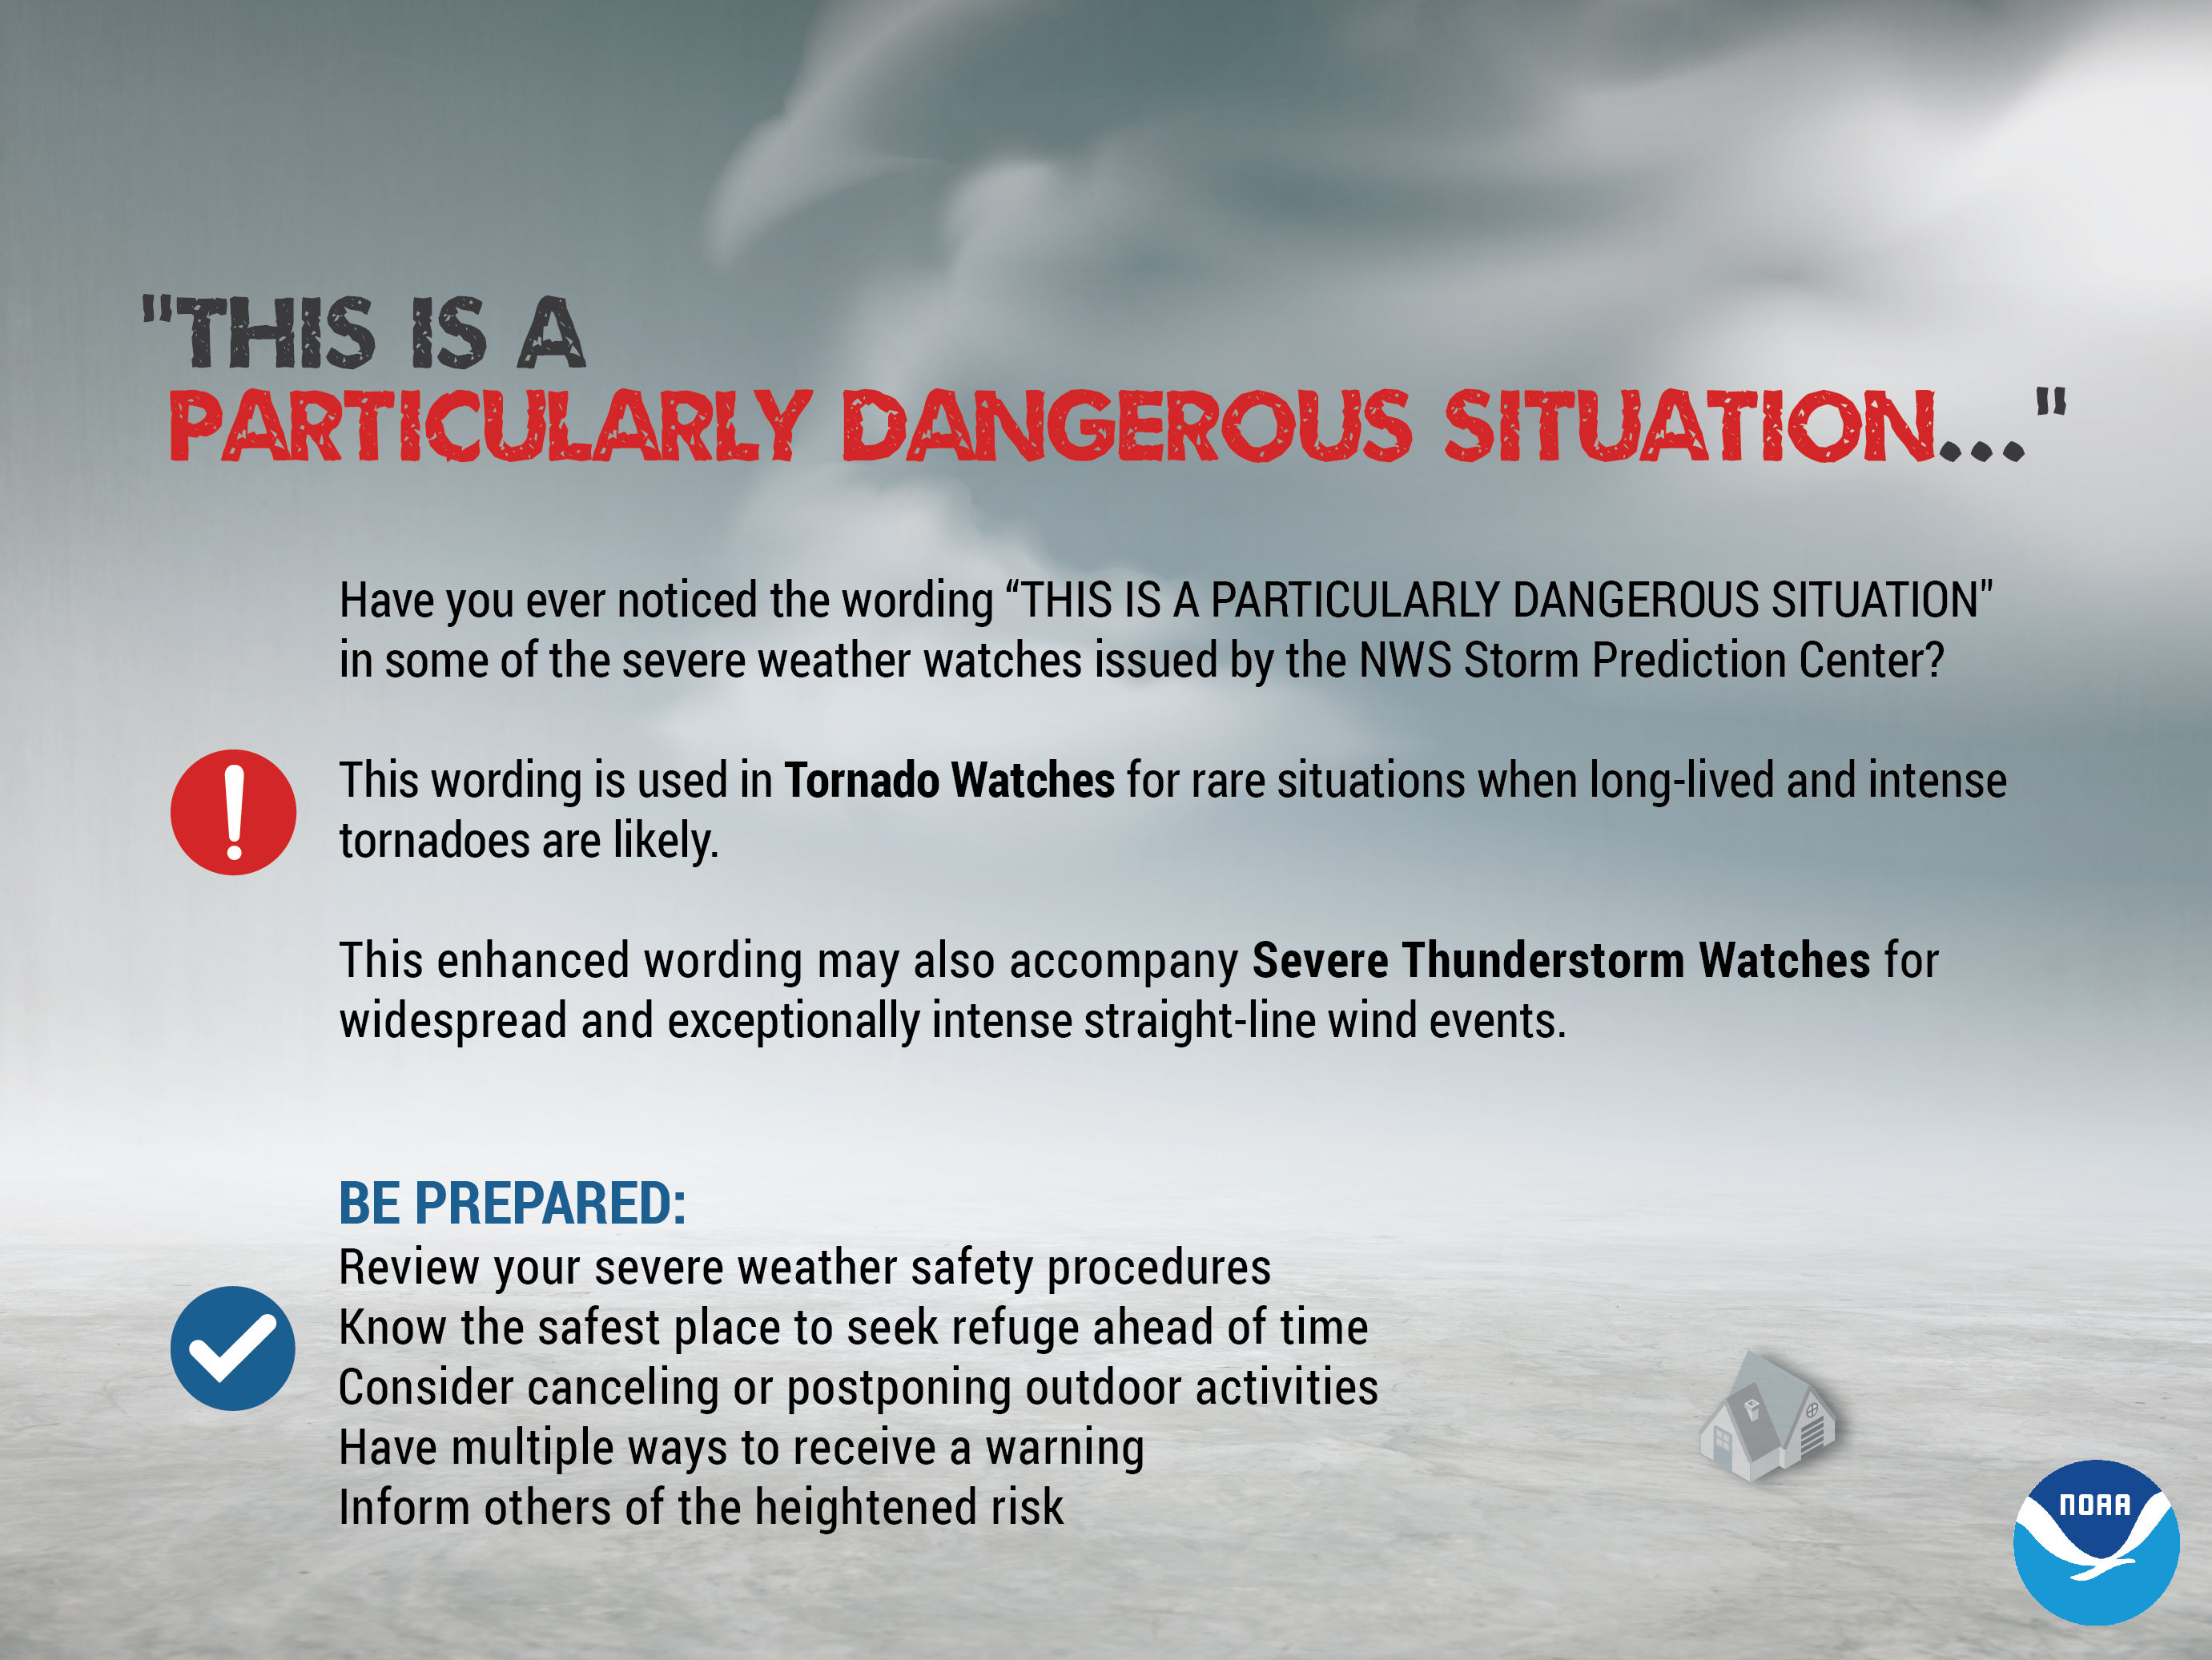 Have you ever noticed the wording 'This is a particularly danagerous situation' in some of the severe weather watches issued by the NWS Storm Prediction Center? This wording is likely used in Tornado Watches for rare situations when long-lived and intense tornadoes are likely. This enhanced wording may also accompany Severe Thunderstorm Watches for widespread and exceptionally intense straight-line wind events. Be prepared! Review your severe weather safety procedures. Know the safest place to seek refuge ahead of time. Consider canceling or postponing outdoor activities. Have multiple ways to receive a warning. Inform others of the heightened risk.